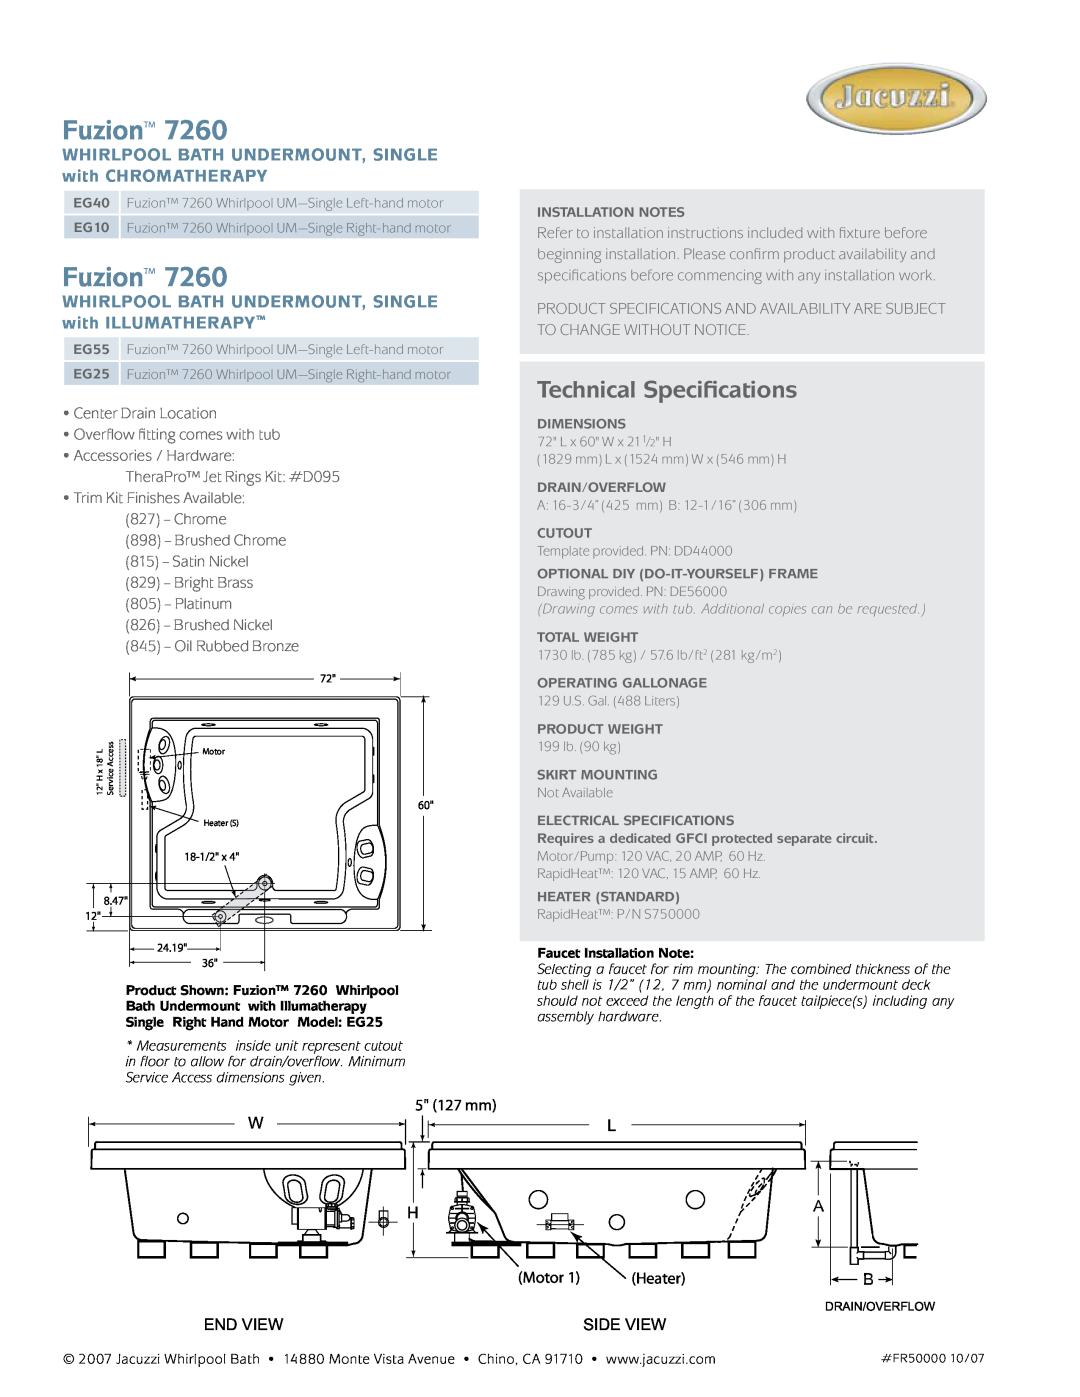 Jacuzzi 7260 dimensions Fuzion, Technical Specifications 